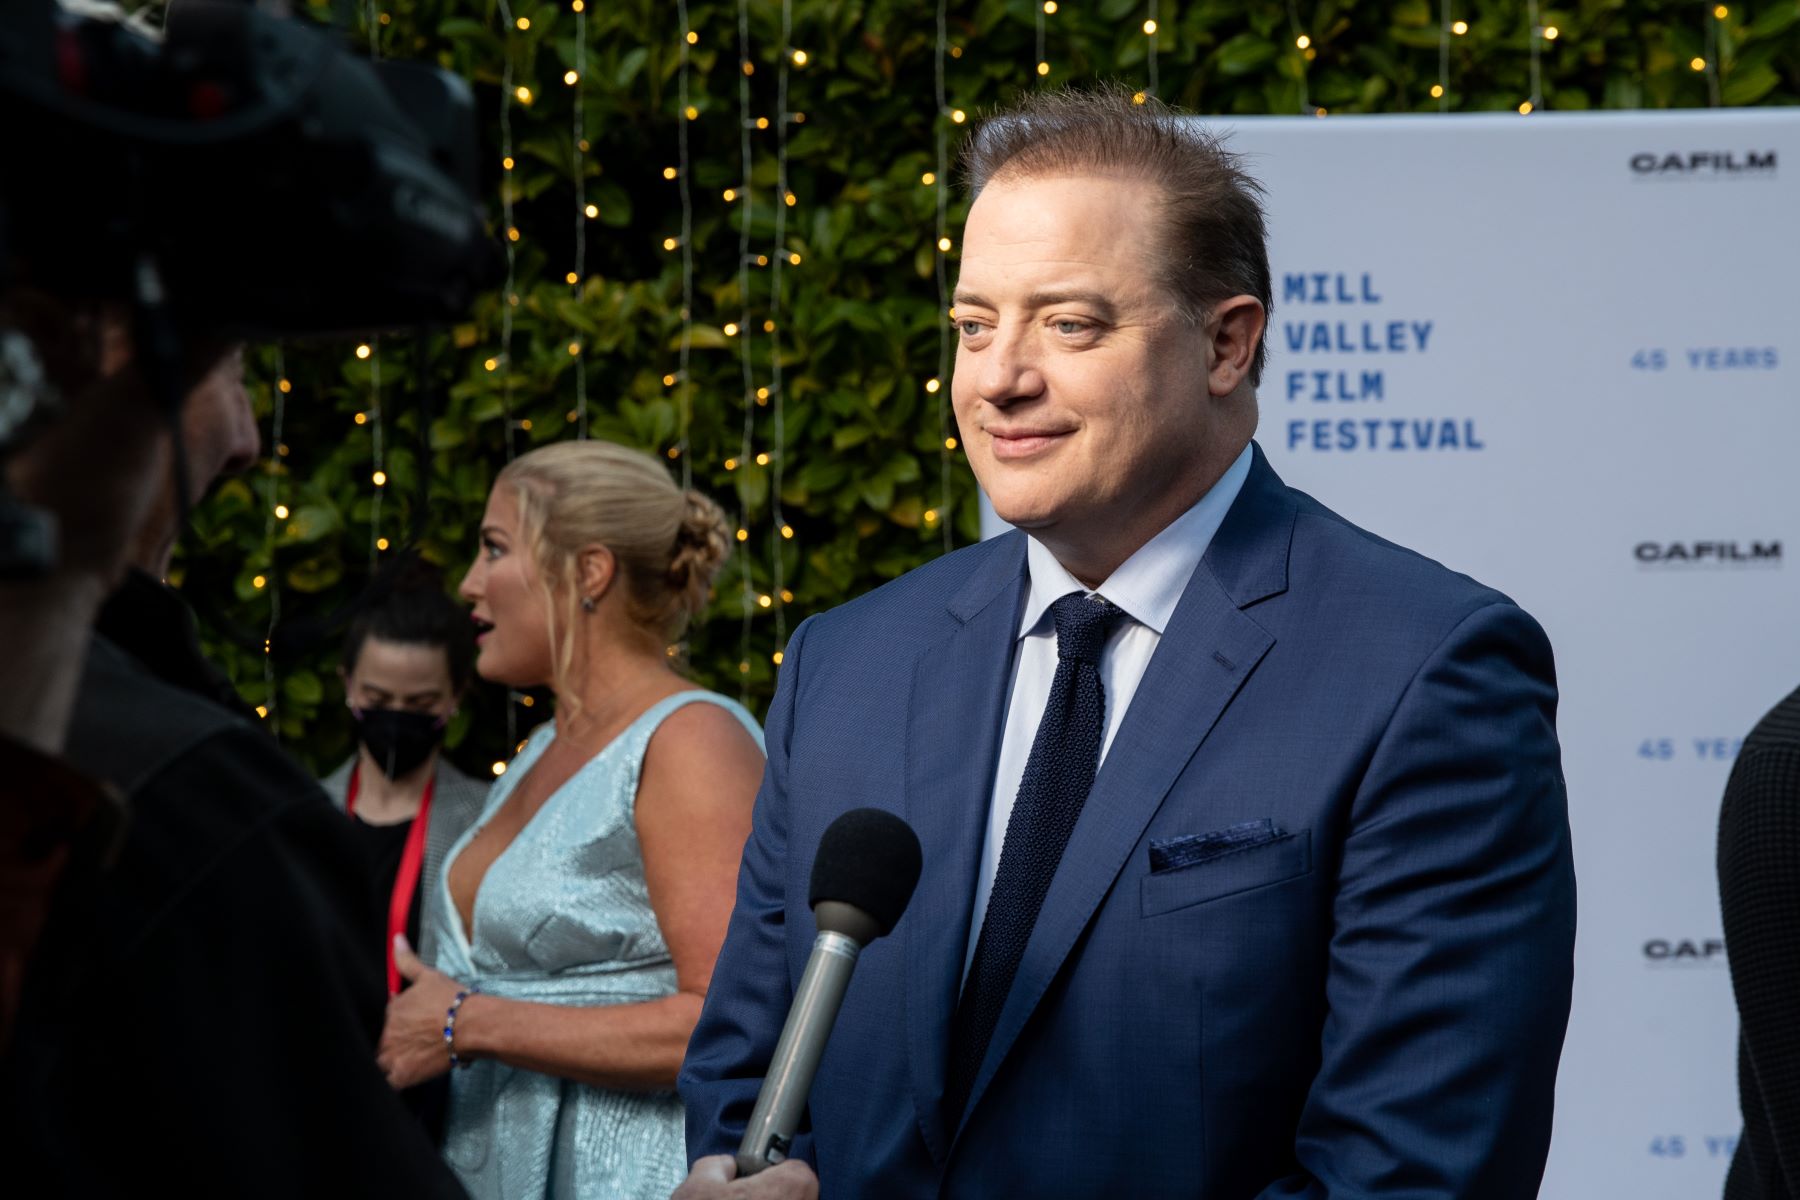 Brendan Fraser attending 'The Whale' premiere at the 45th Mill Valley Film Festival